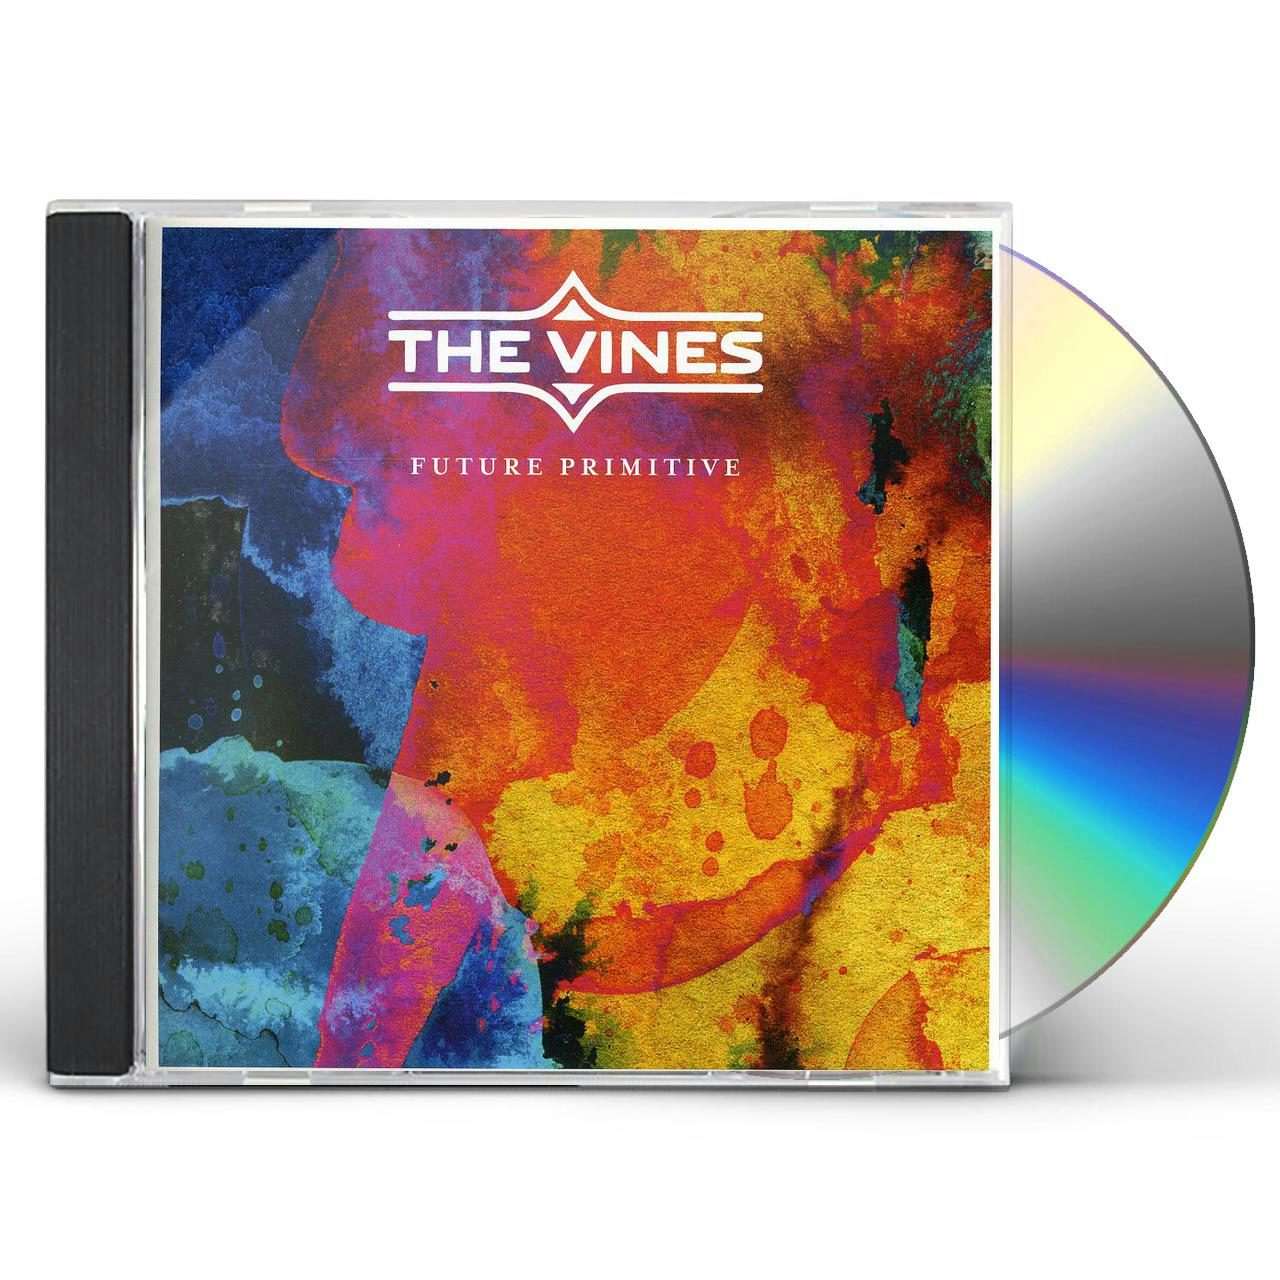 Highly Evolved Vinyl Record - The Vines